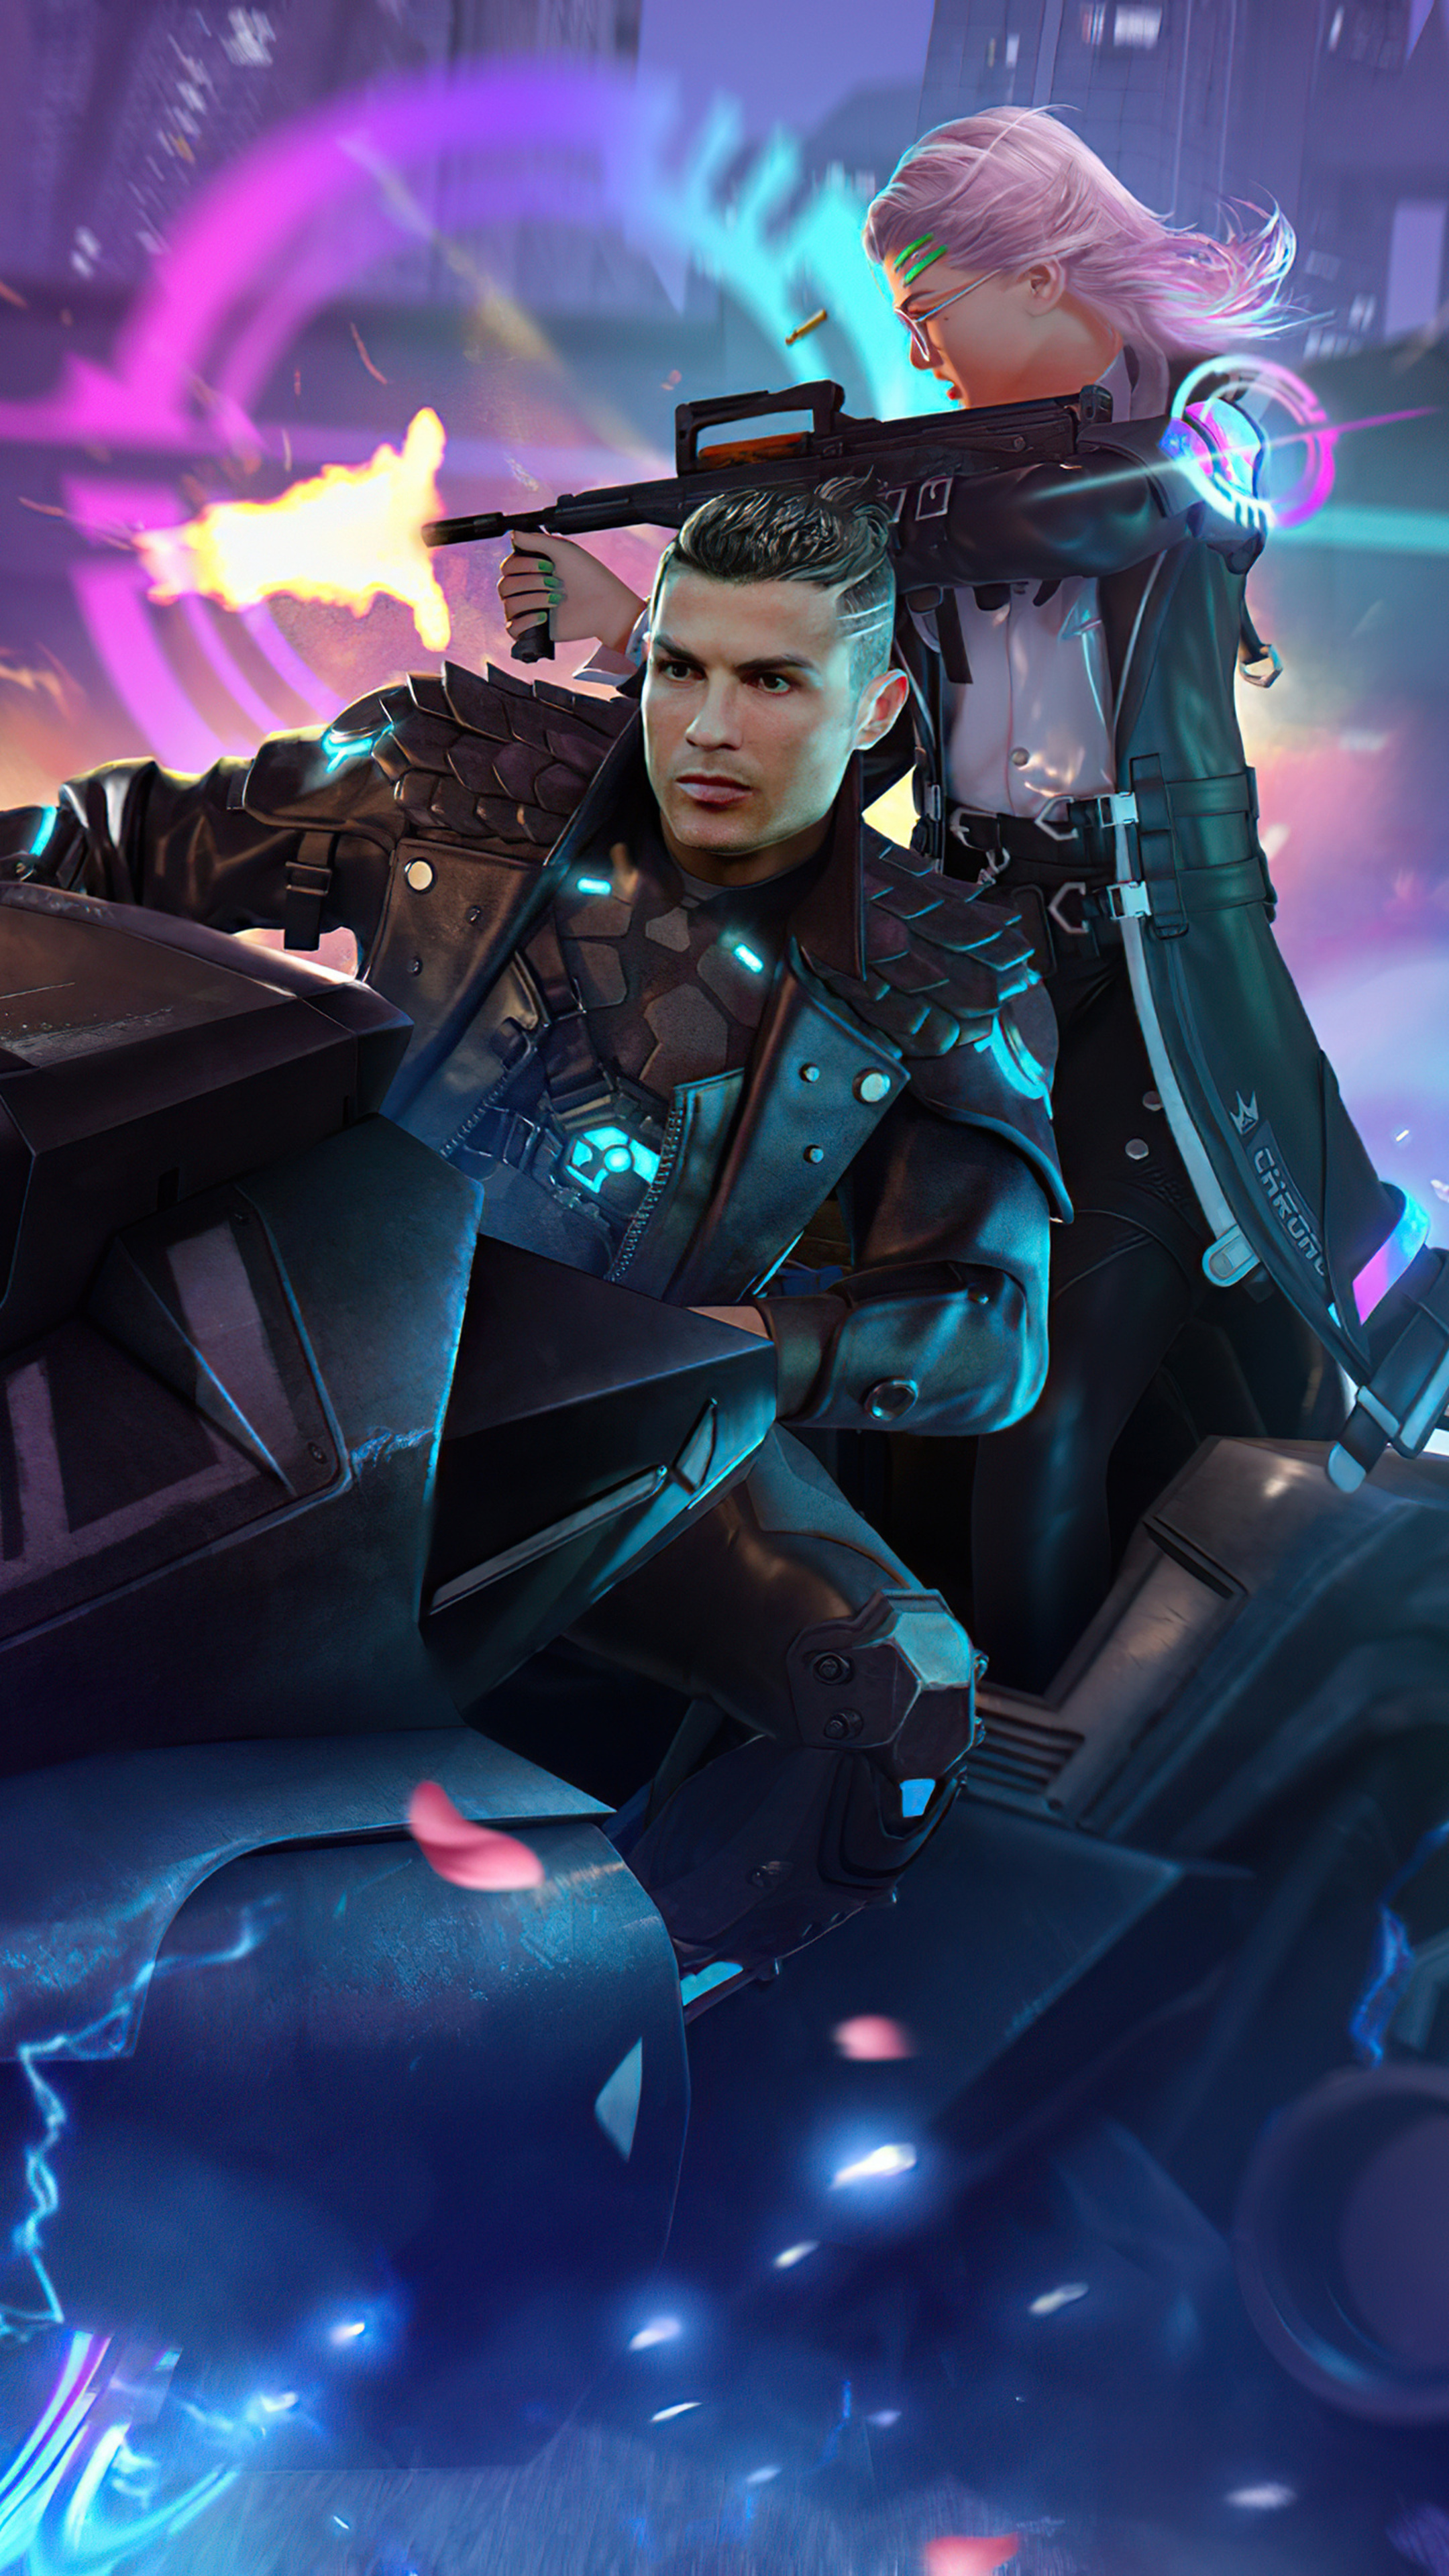 Cristiano Ronaldo in Free Fire, 5K Xperia wallpapers, Stunning artwork, Iconic collaboration, 2160x3840 4K Handy